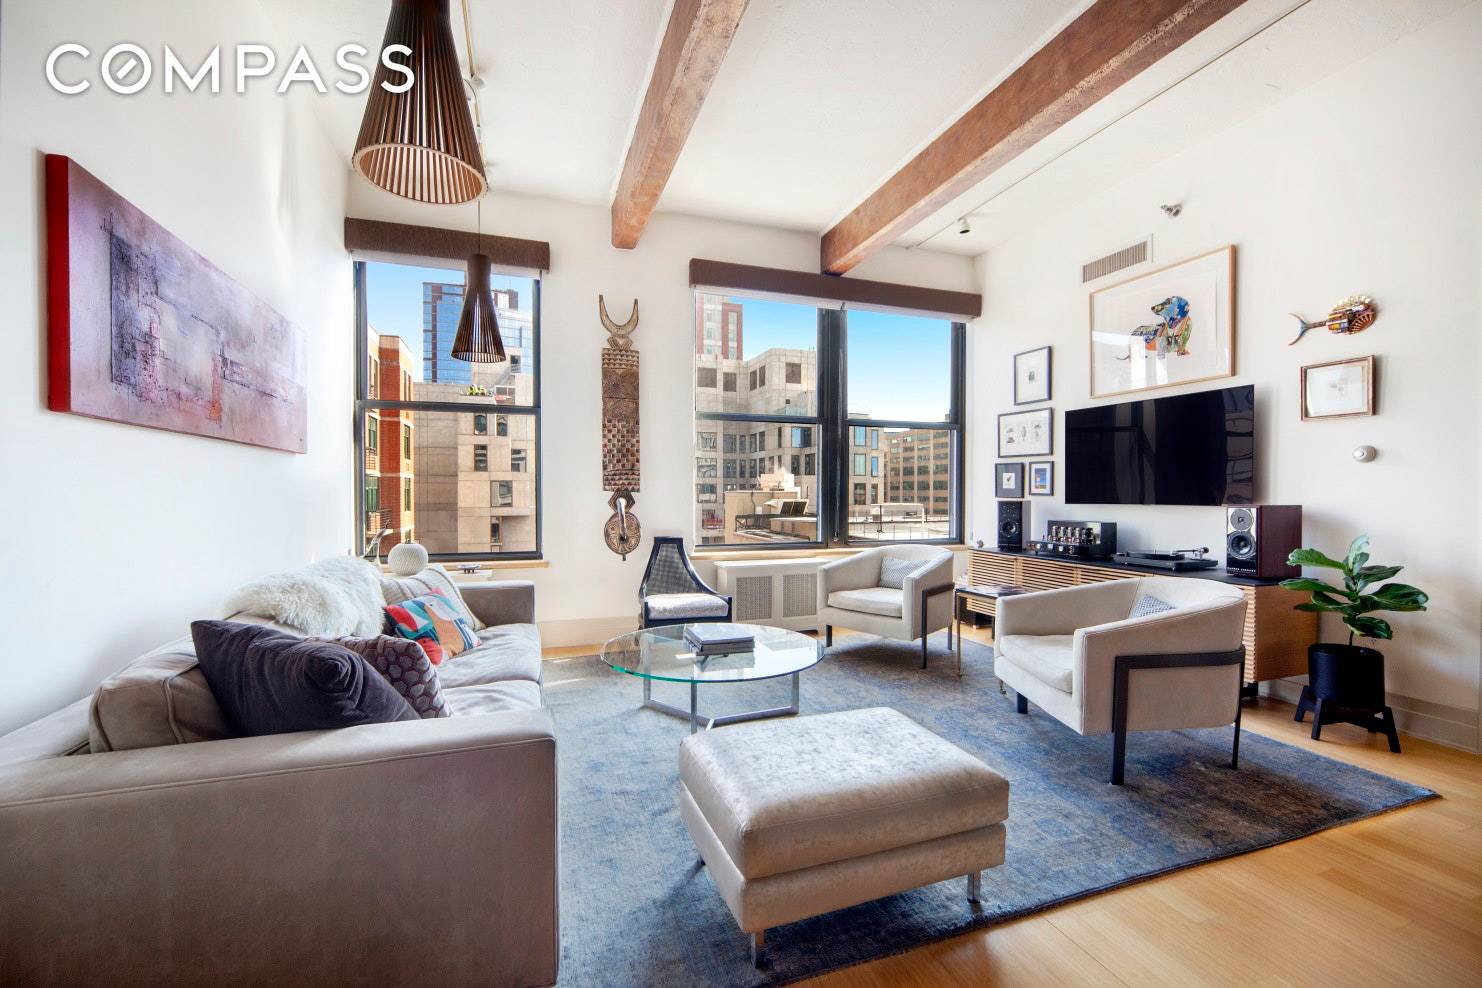 Enjoy ideal Dumbo living in this spacious and bright one bedroom plus home office, two bathroom loft in one of the neighborhood's premier luxury condominium buildings.